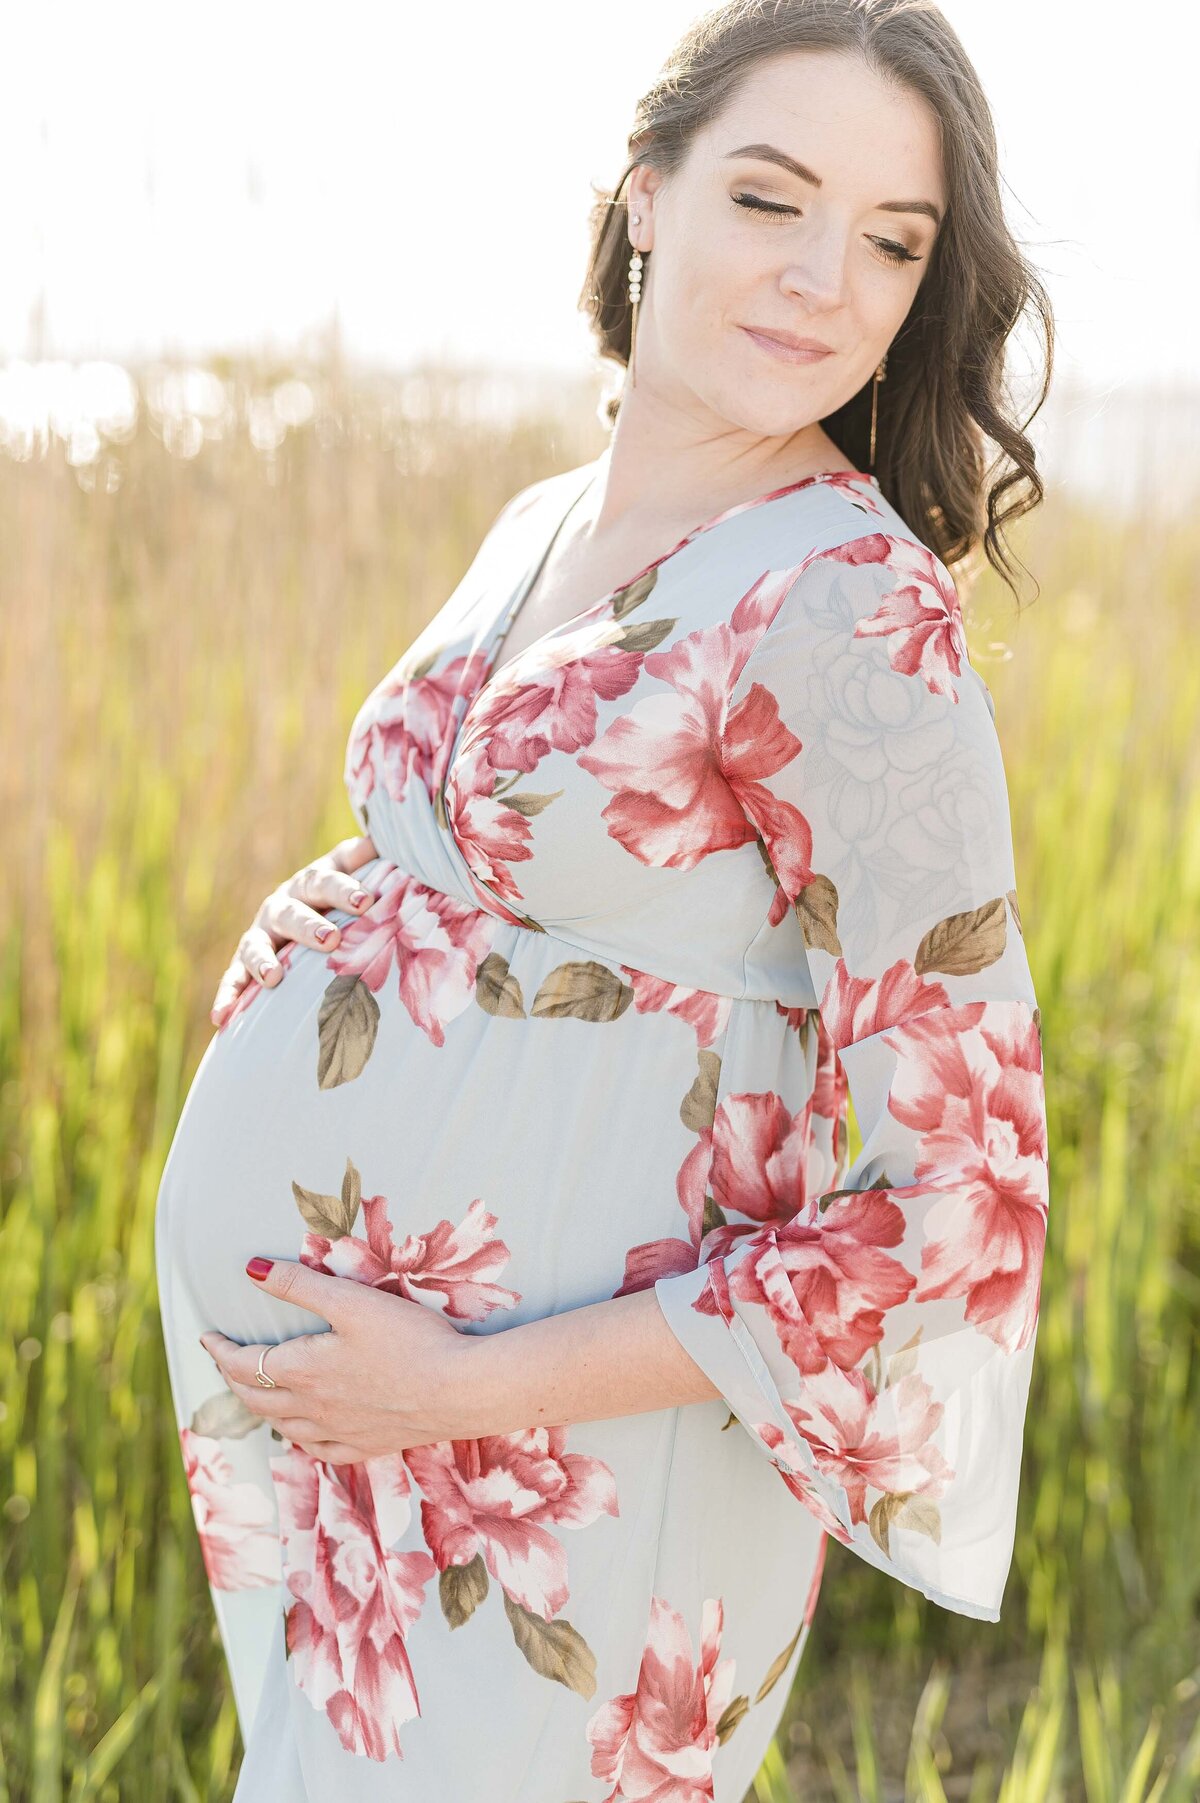 Norman & Devon’s CT coastal maternity session photographed by Schwalbs Photography